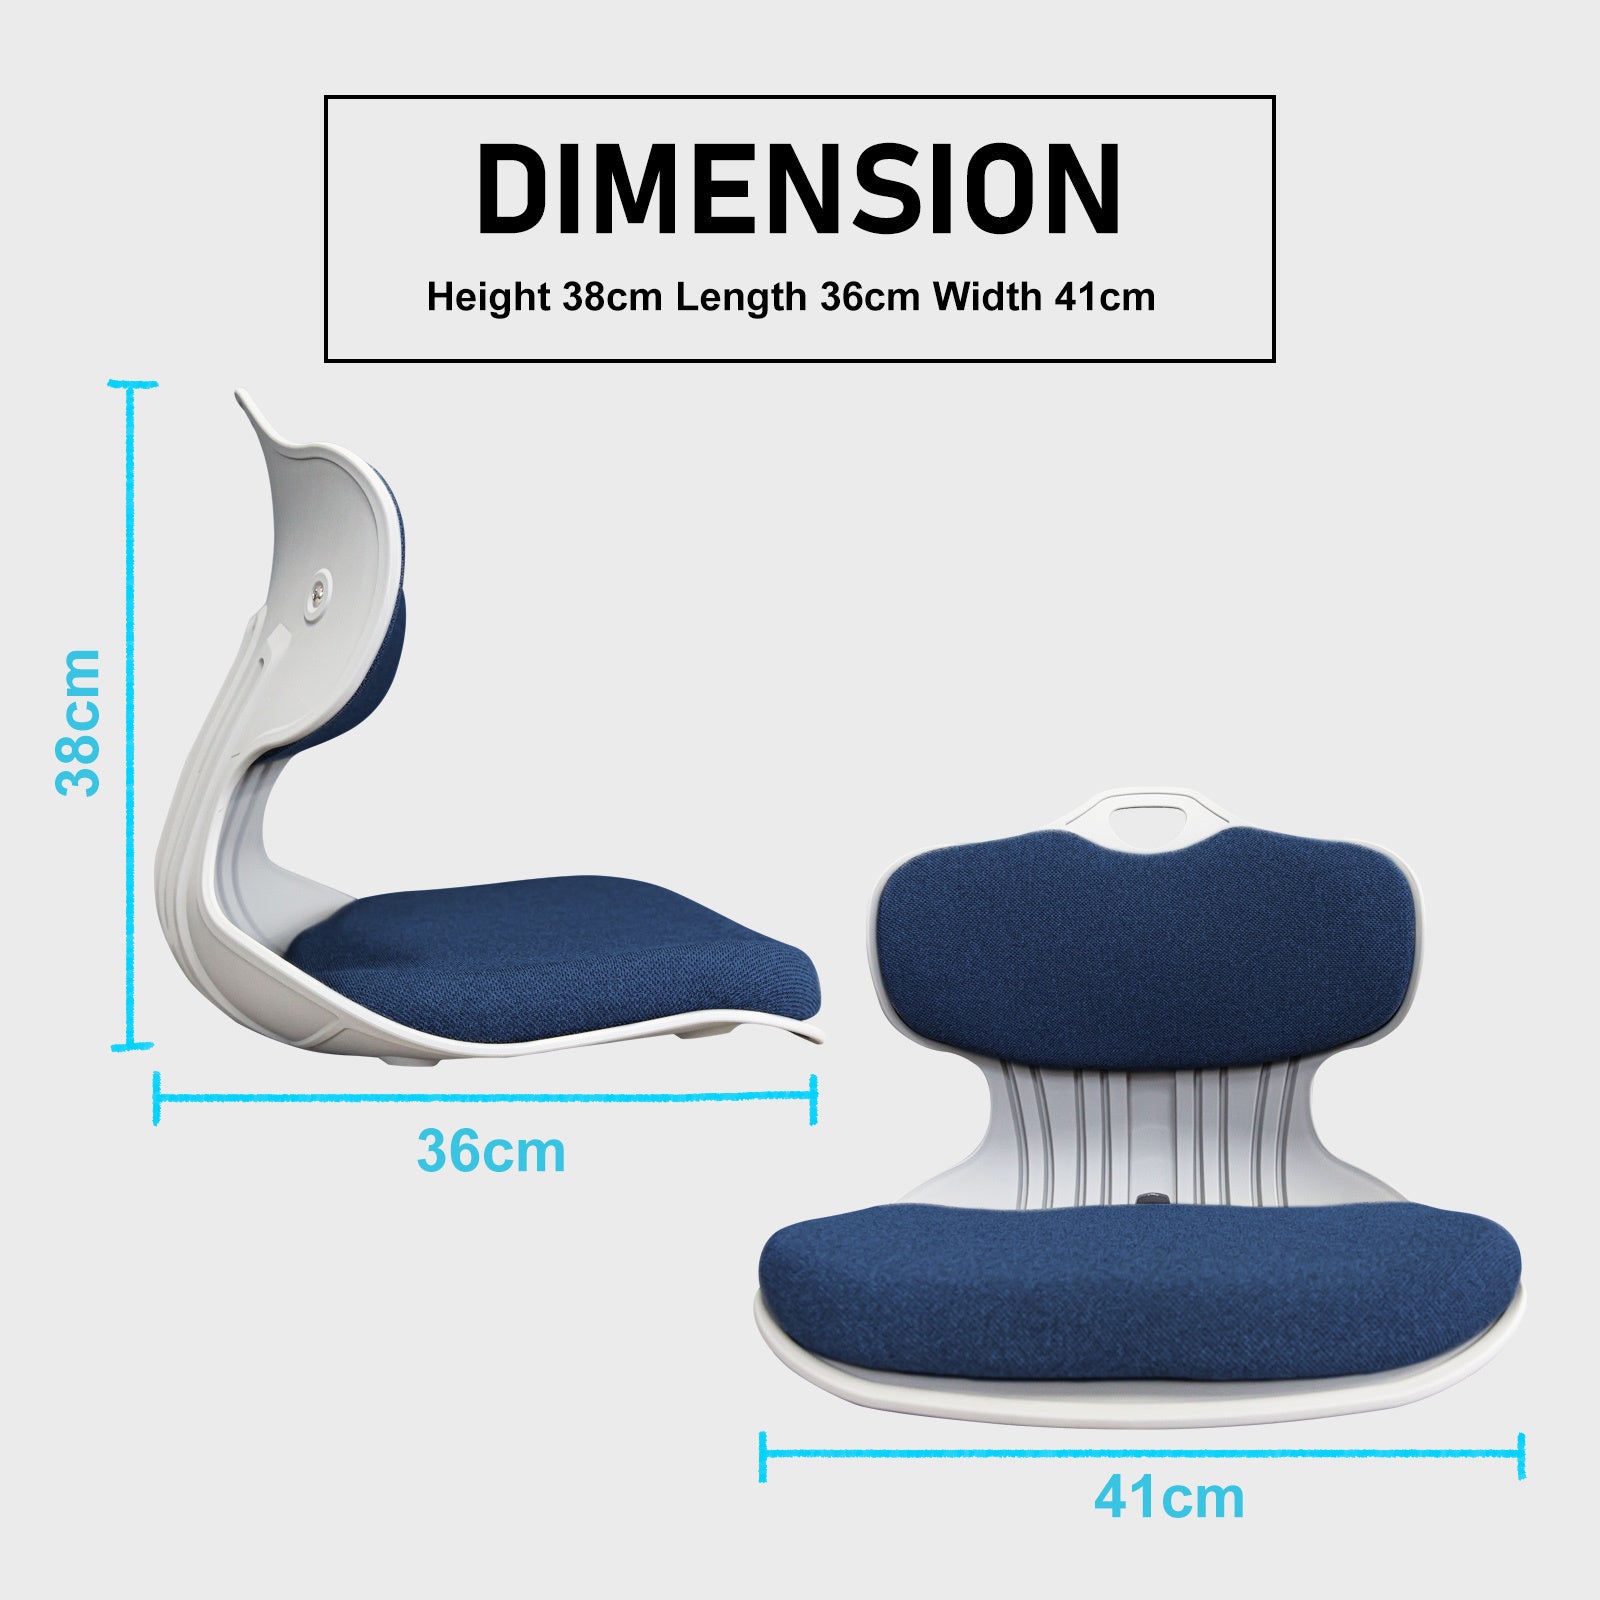 Samgong Posture Correction Slender Chair in Blue Set - 4 Pieces - Notbrand